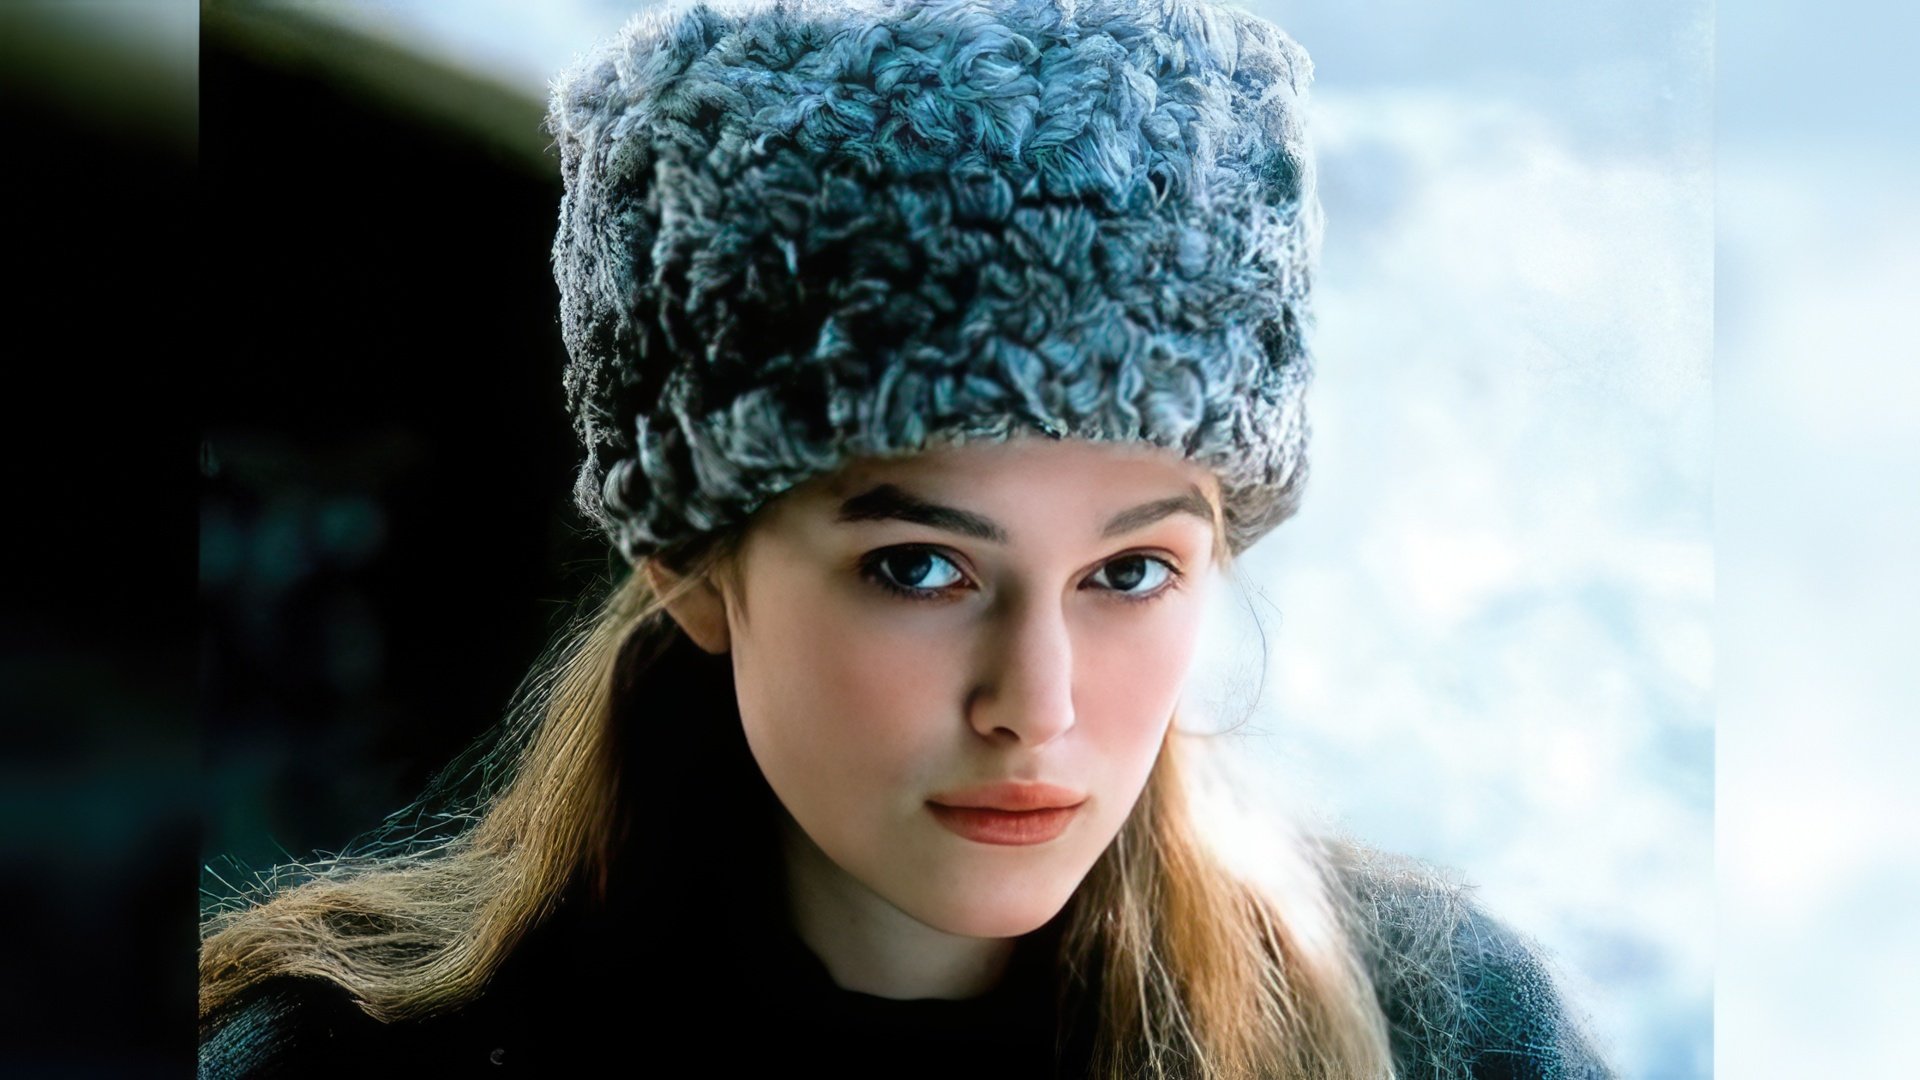 Young Keira Knightley in “Doctor Zhivago”